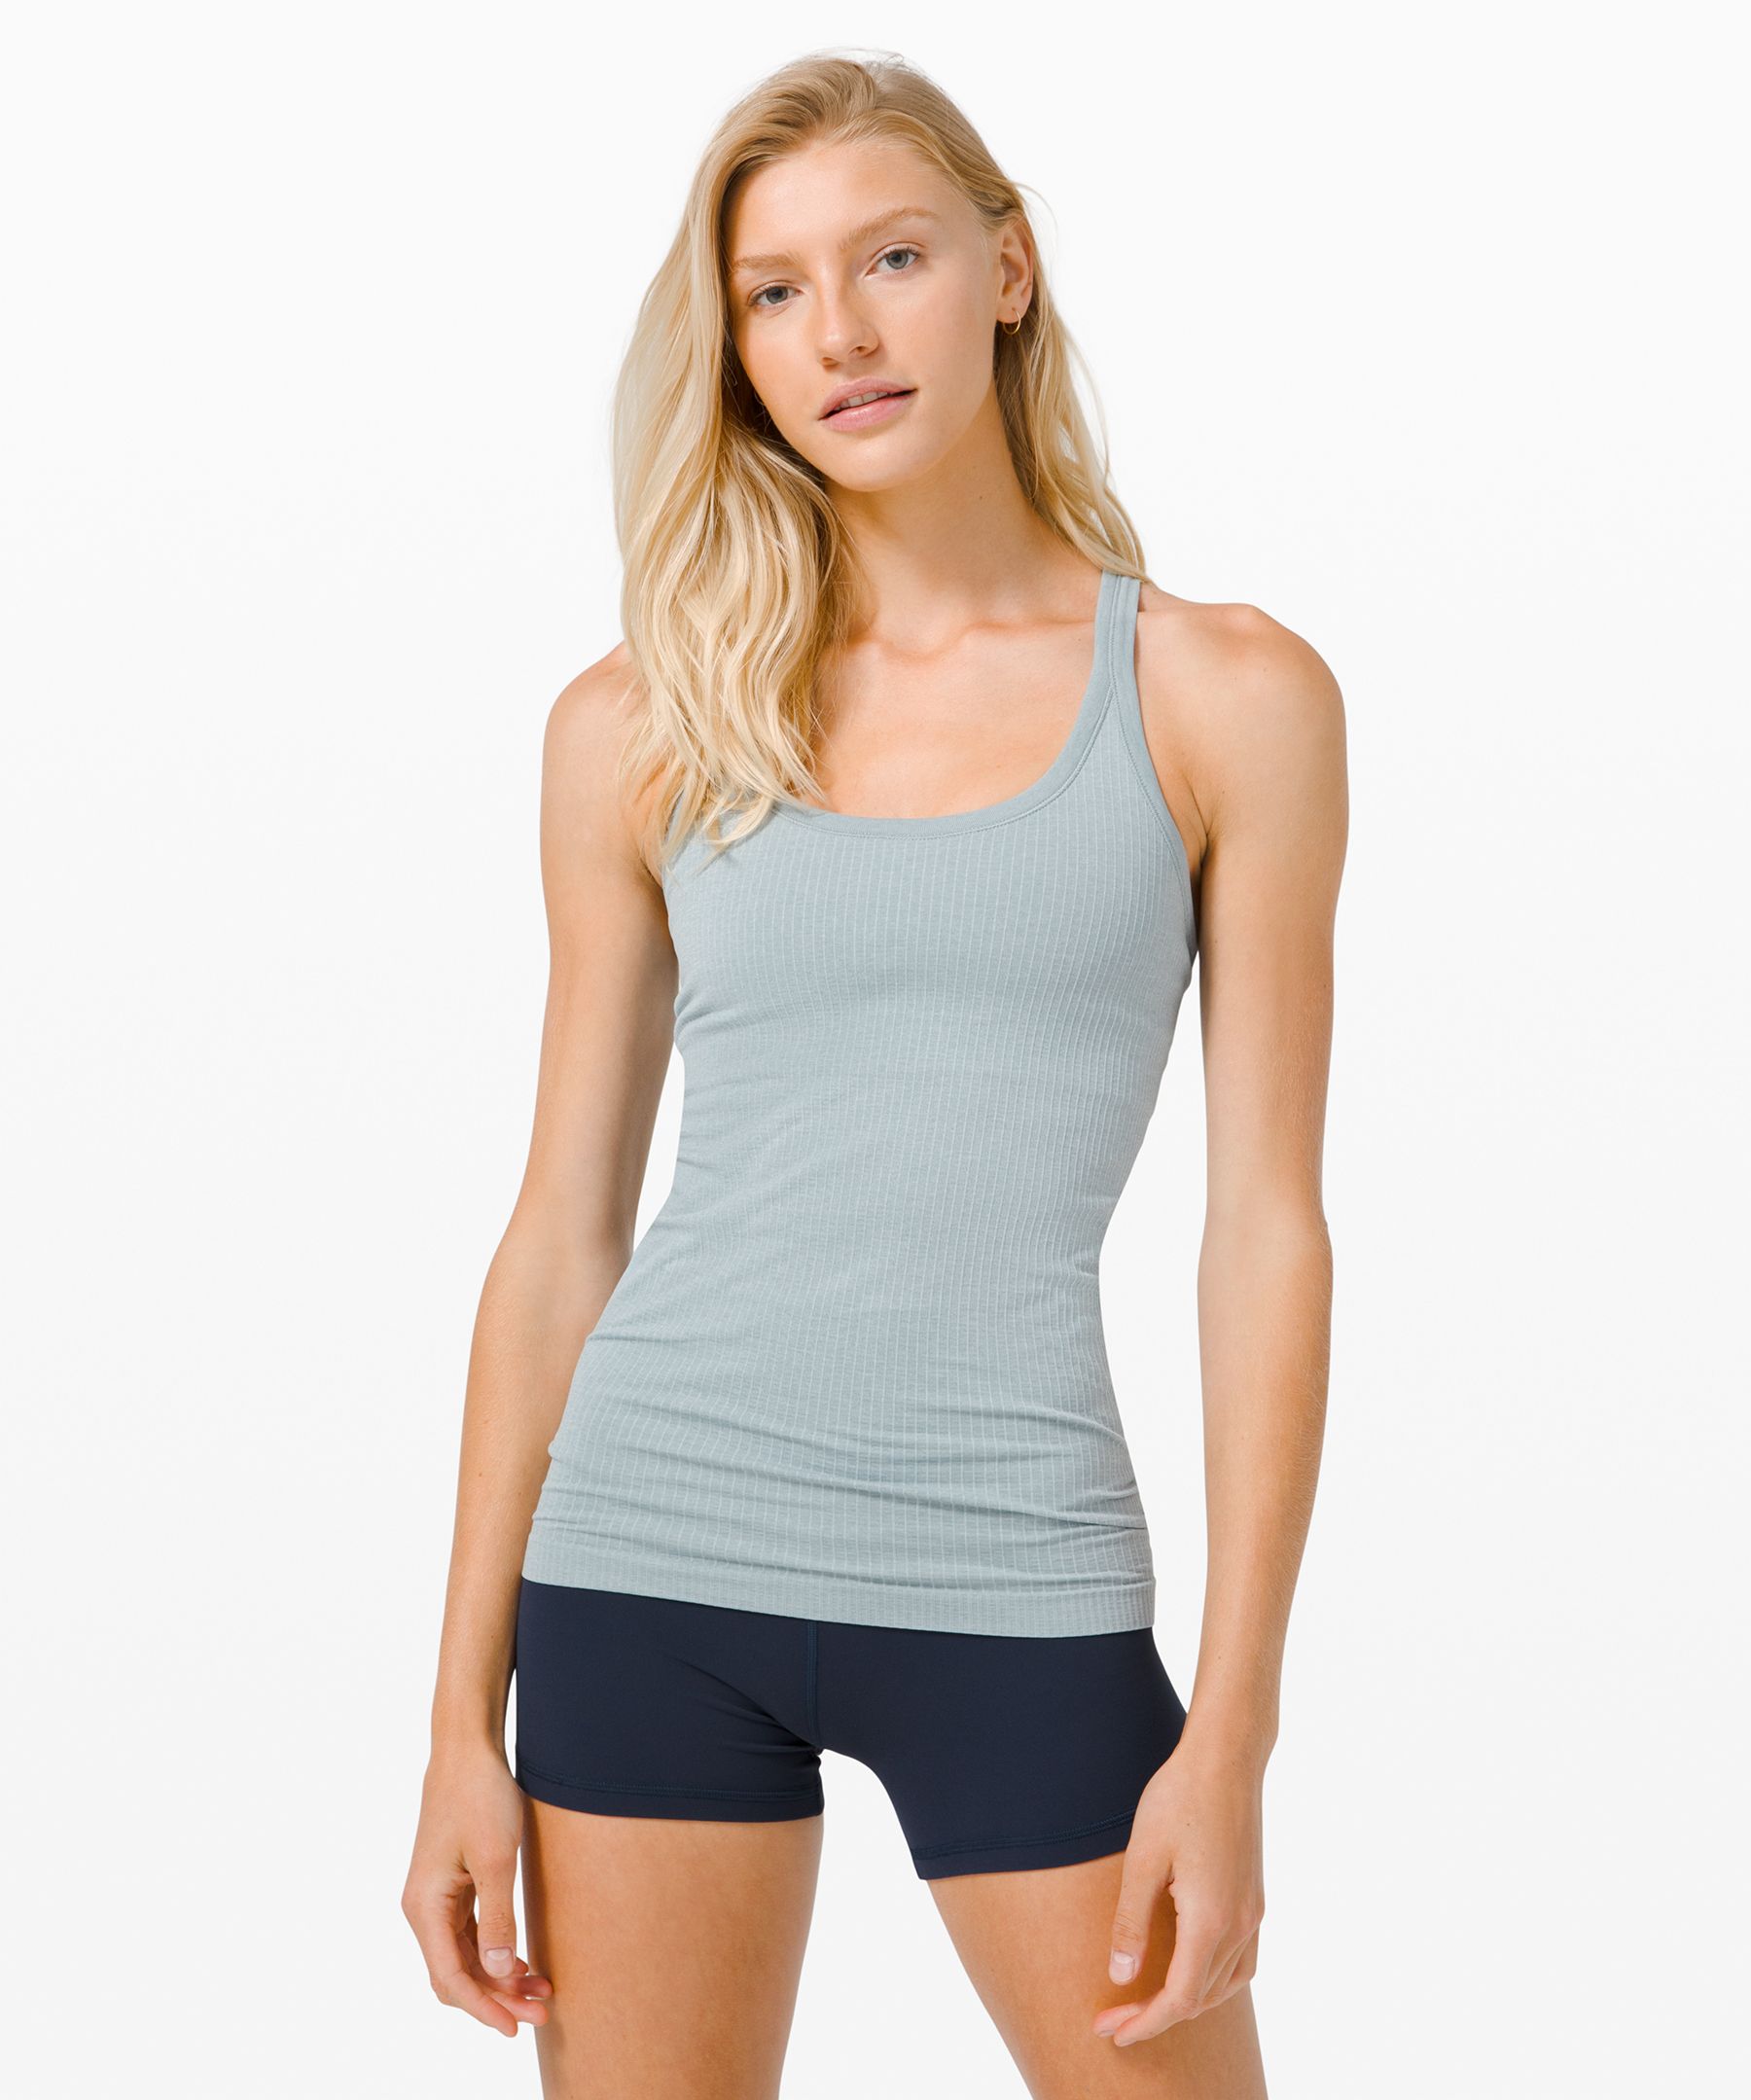 Lululemon Ebb To Street Tank *Light Support For B/C Cup - Blue